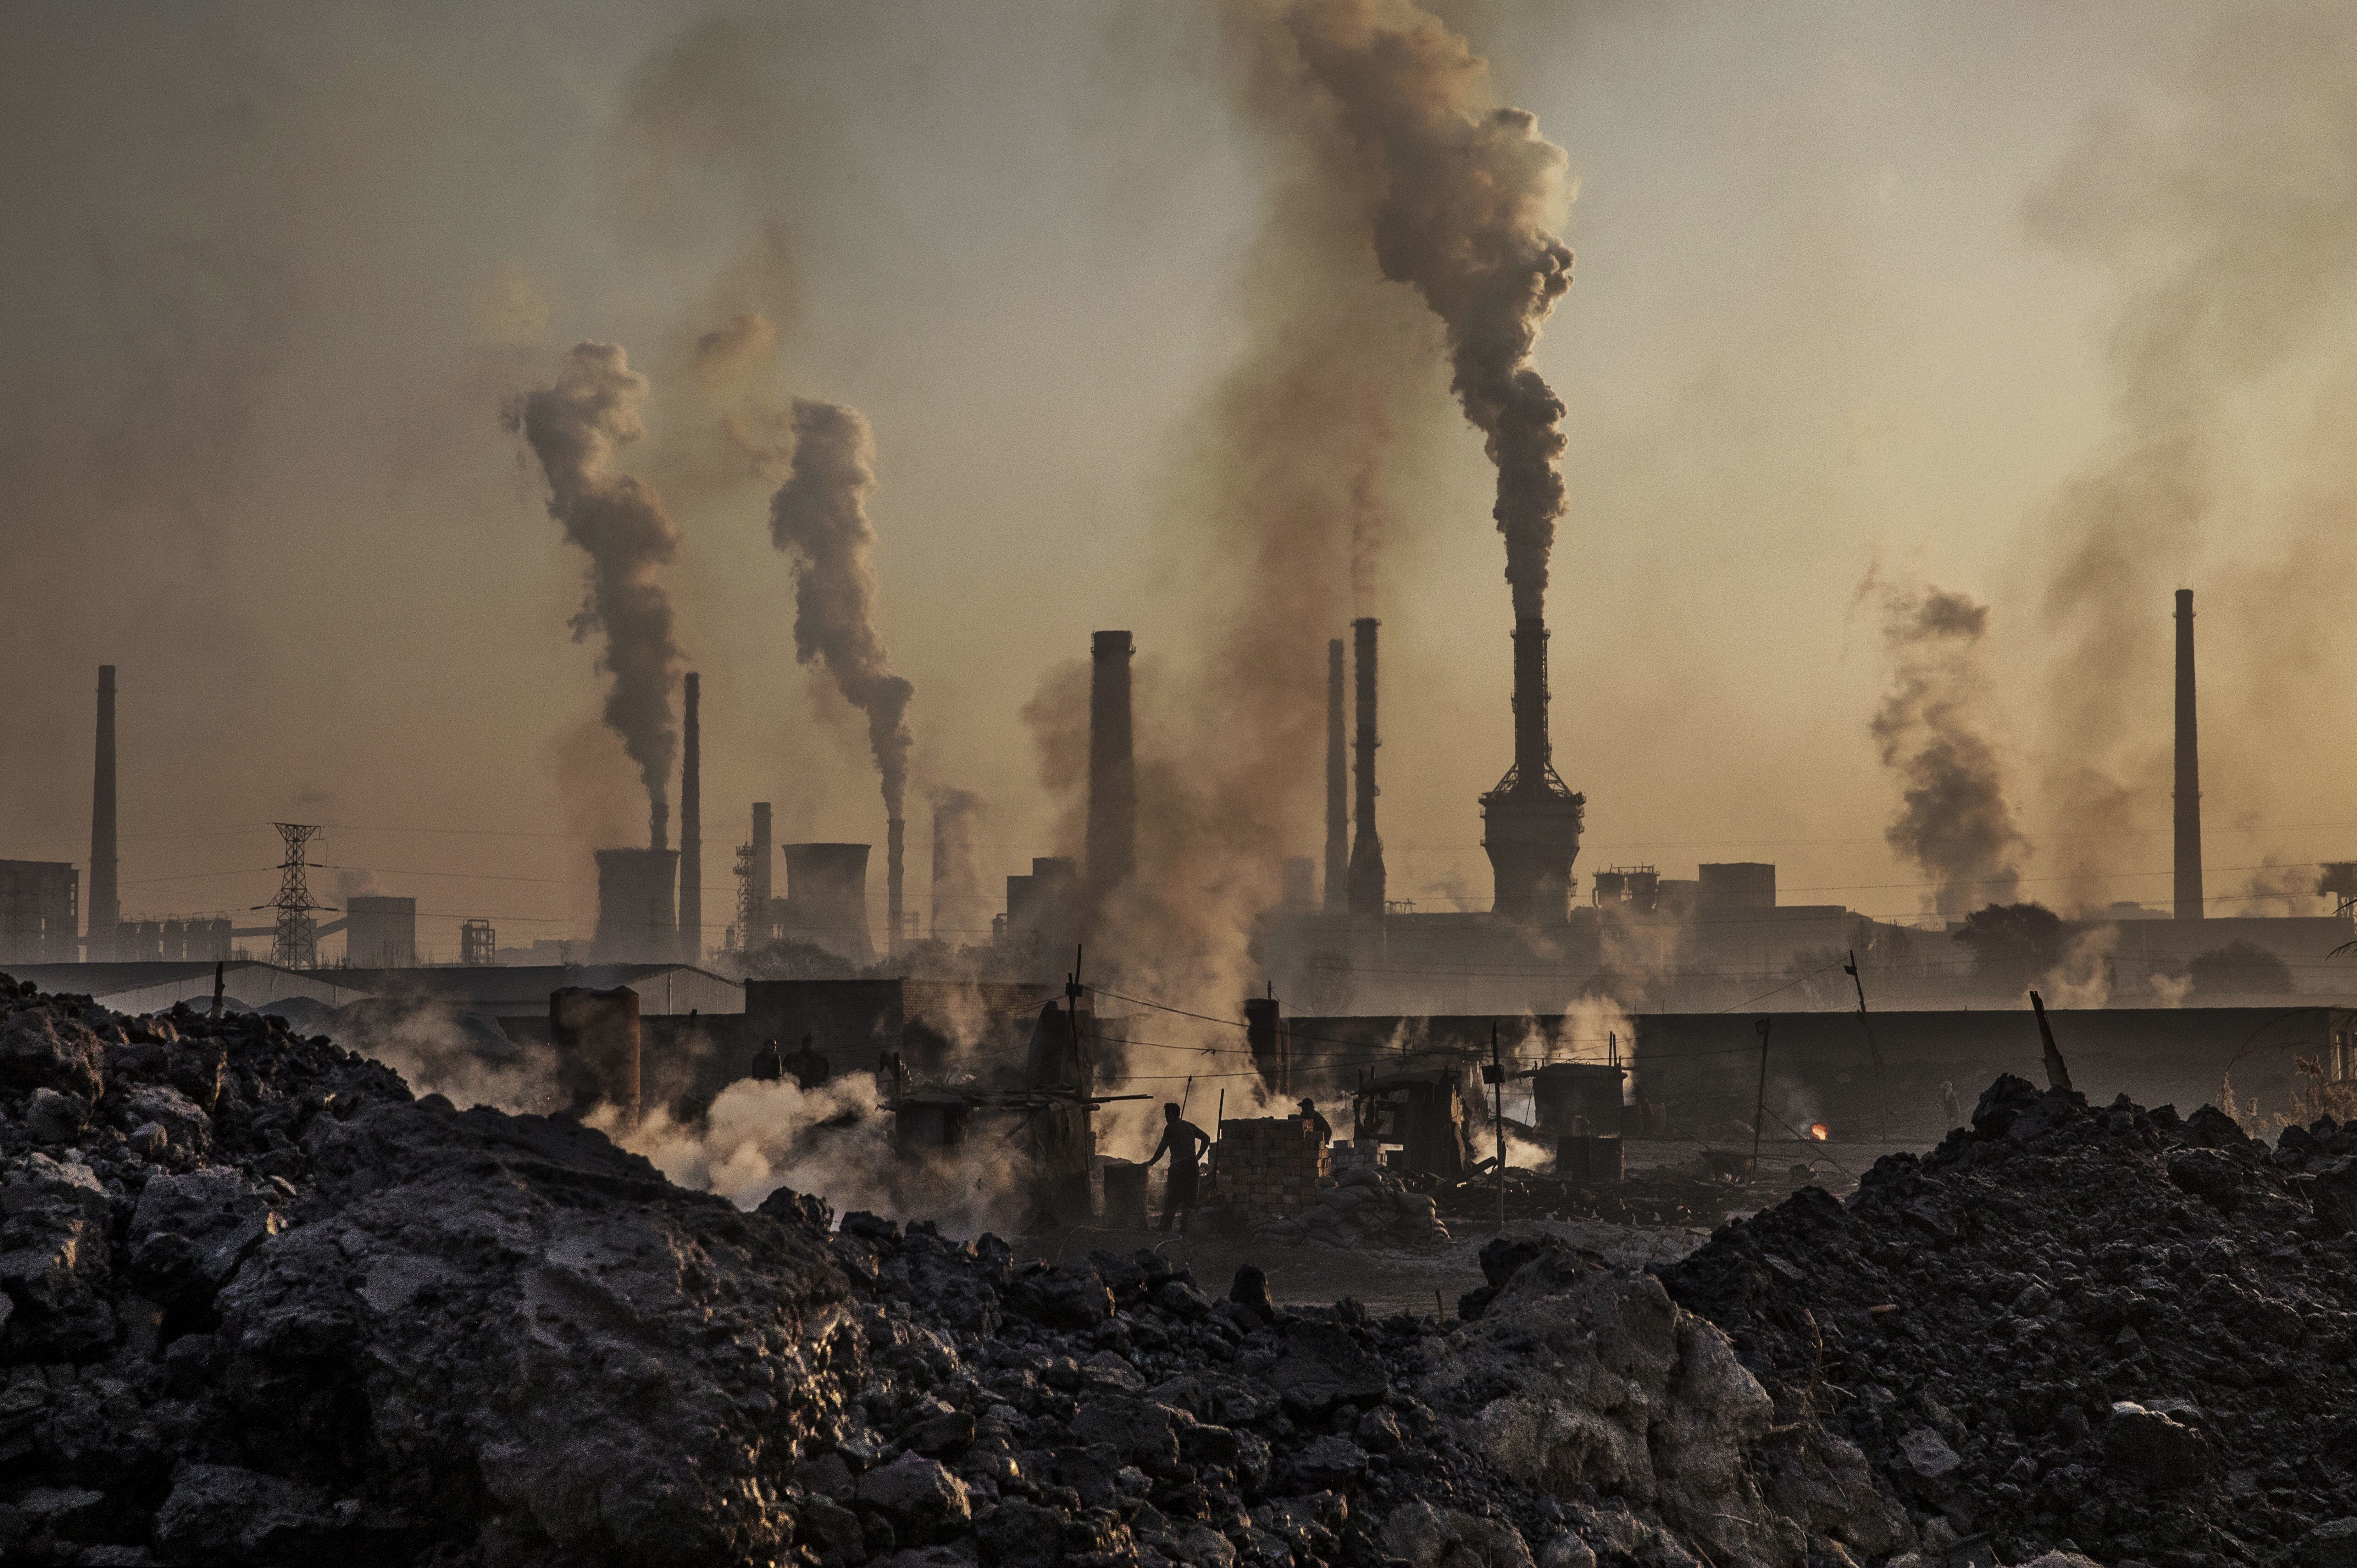 Smoke billows from a large steel plant in Inner Mongolia, China. Beijing is looking to make the country carbon neutral by 2060. Photo: Getty Images